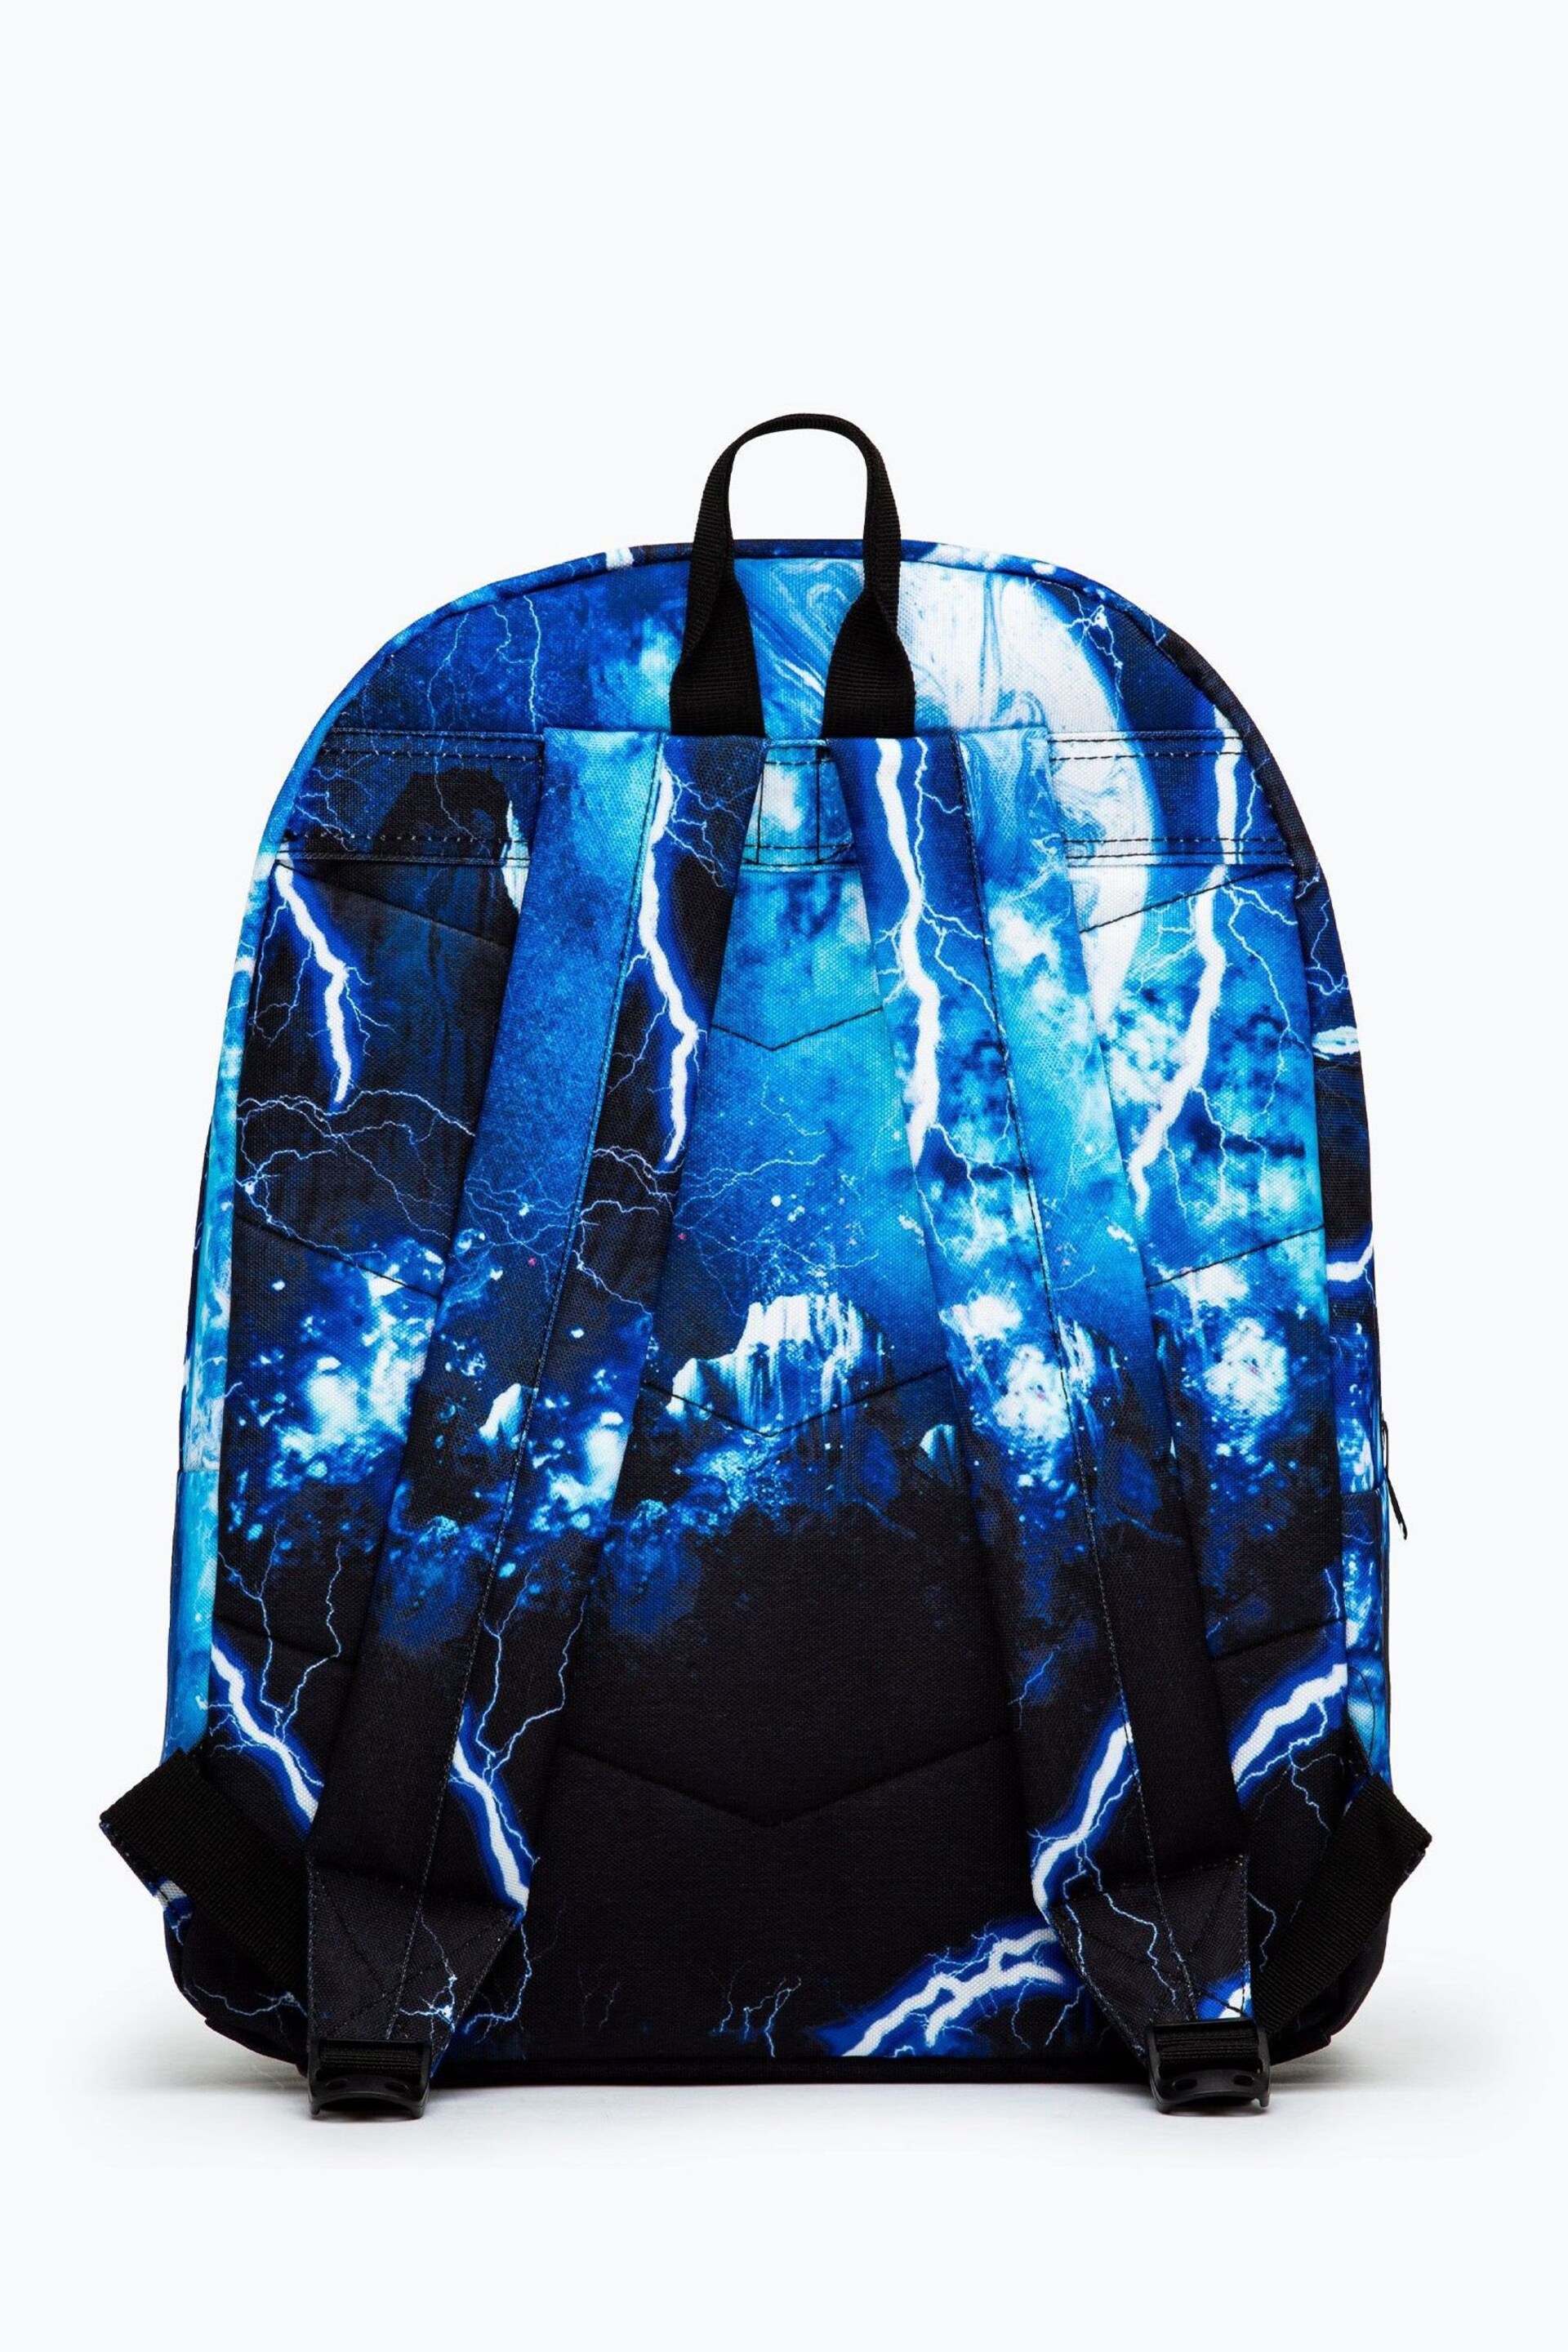 Hype. Blue Galaxy Lightning Backpack - Image 3 of 9